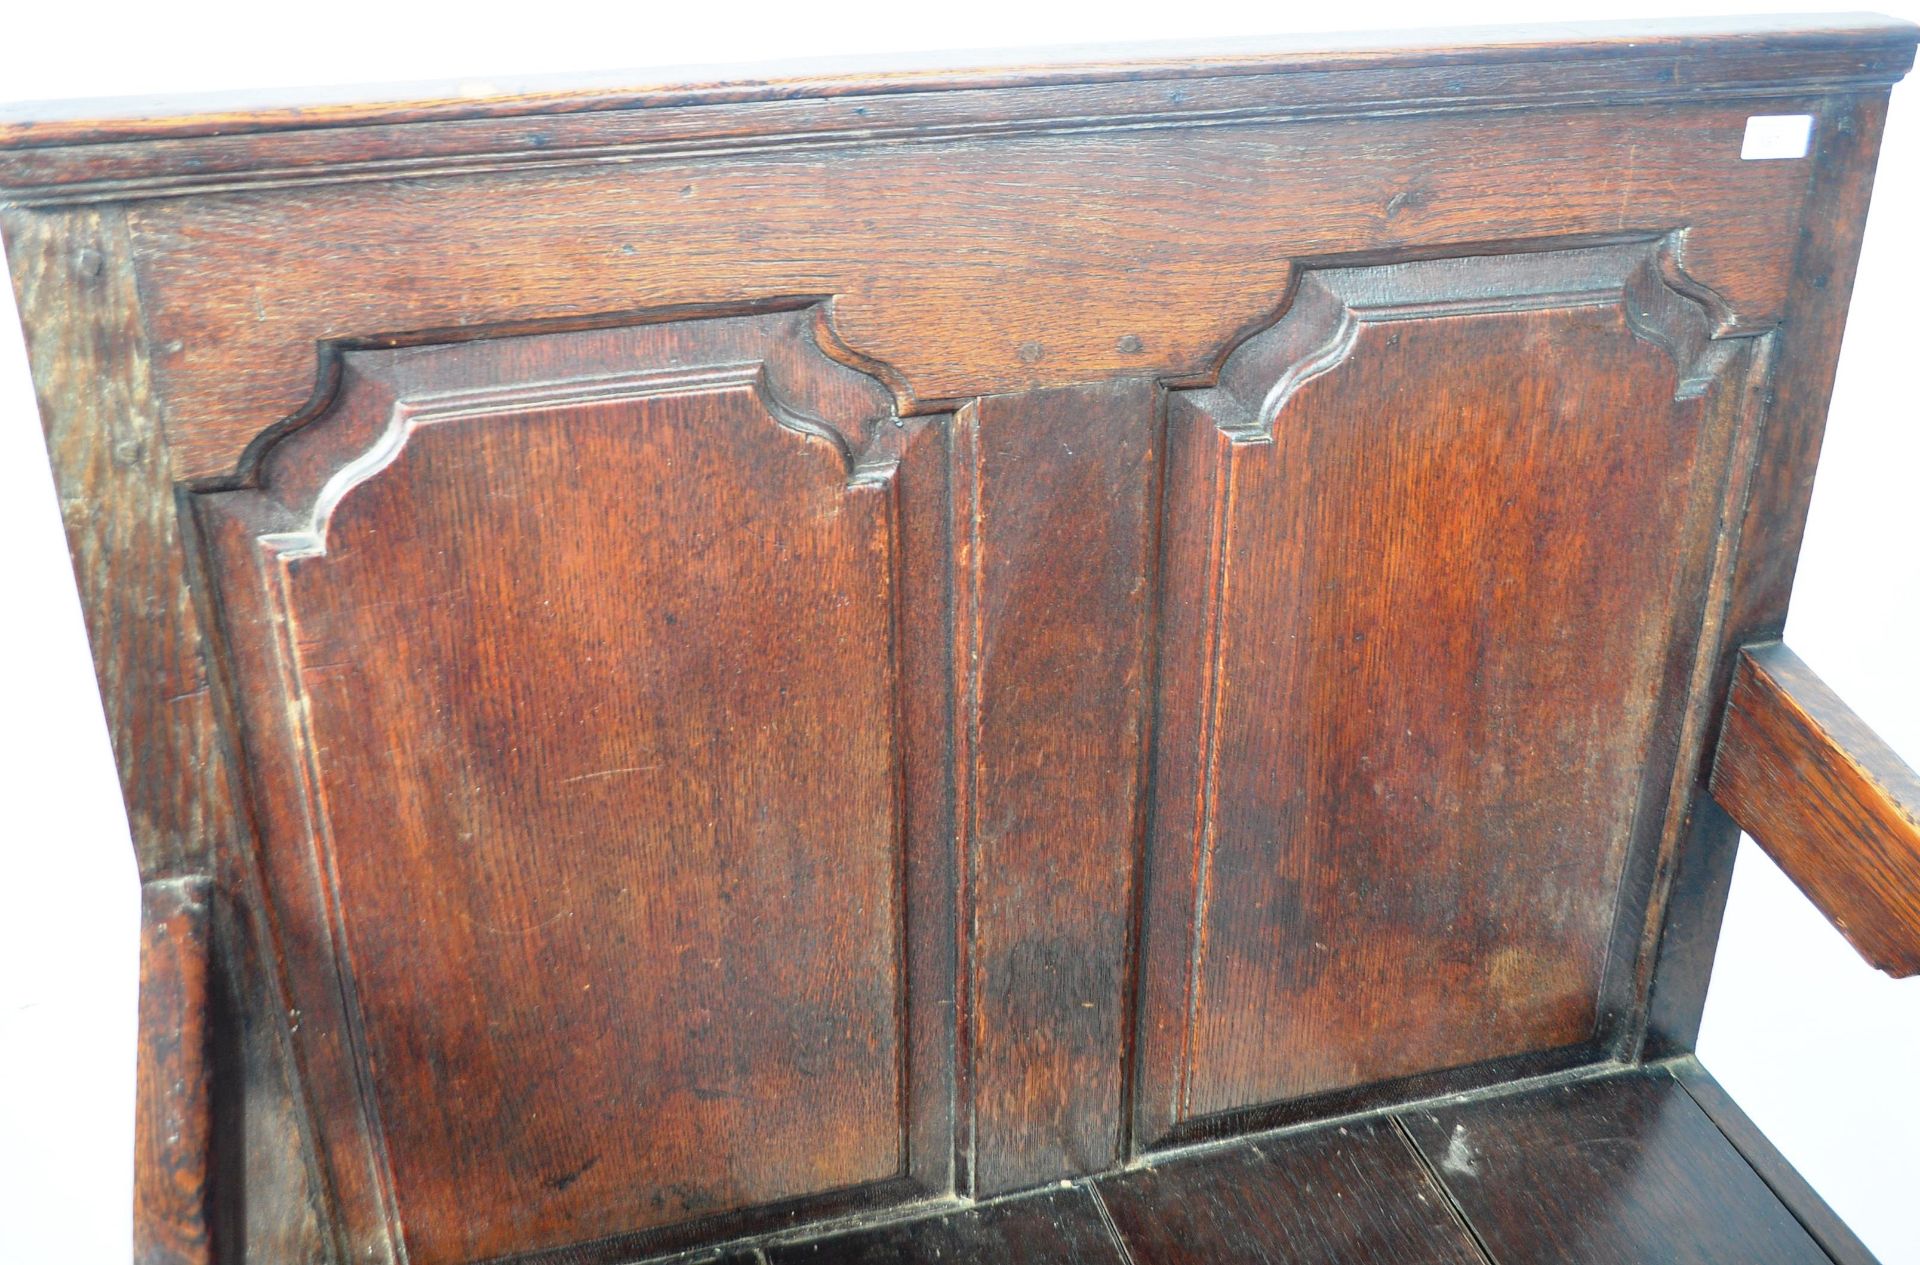 ANTIQUE 18TH CENTURY OAK TWO SEATER HALL SETTLE BENCH - Image 6 of 6